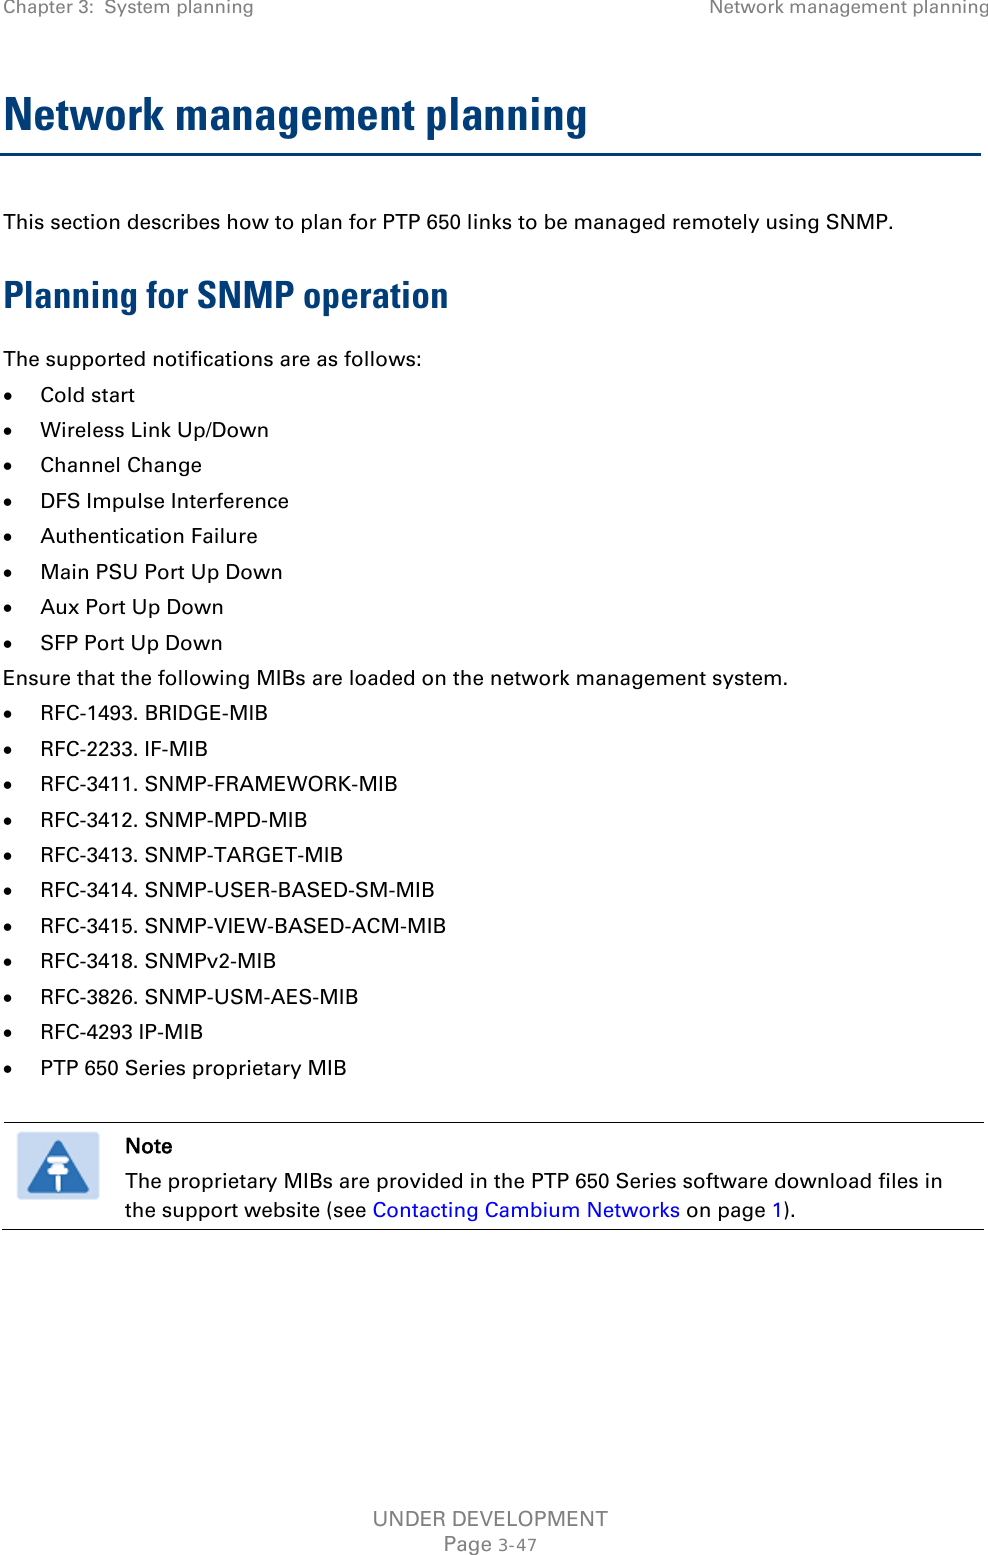 Chapter 3:  System planning Network management planning  Network management planning This section describes how to plan for PTP 650 links to be managed remotely using SNMP. Planning for SNMP operation The supported notifications are as follows: • Cold start • Wireless Link Up/Down • Channel Change • DFS Impulse Interference • Authentication Failure • Main PSU Port Up Down • Aux Port Up Down • SFP Port Up Down Ensure that the following MIBs are loaded on the network management system. • RFC-1493. BRIDGE-MIB • RFC-2233. IF-MIB • RFC-3411. SNMP-FRAMEWORK-MIB • RFC-3412. SNMP-MPD-MIB • RFC-3413. SNMP-TARGET-MIB • RFC-3414. SNMP-USER-BASED-SM-MIB • RFC-3415. SNMP-VIEW-BASED-ACM-MIB • RFC-3418. SNMPv2-MIB • RFC-3826. SNMP-USM-AES-MIB • RFC-4293 IP-MIB • PTP 650 Series proprietary MIB   Note The proprietary MIBs are provided in the PTP 650 Series software download files in the support website (see Contacting Cambium Networks on page 1).   UNDER DEVELOPMENT Page 3-47 